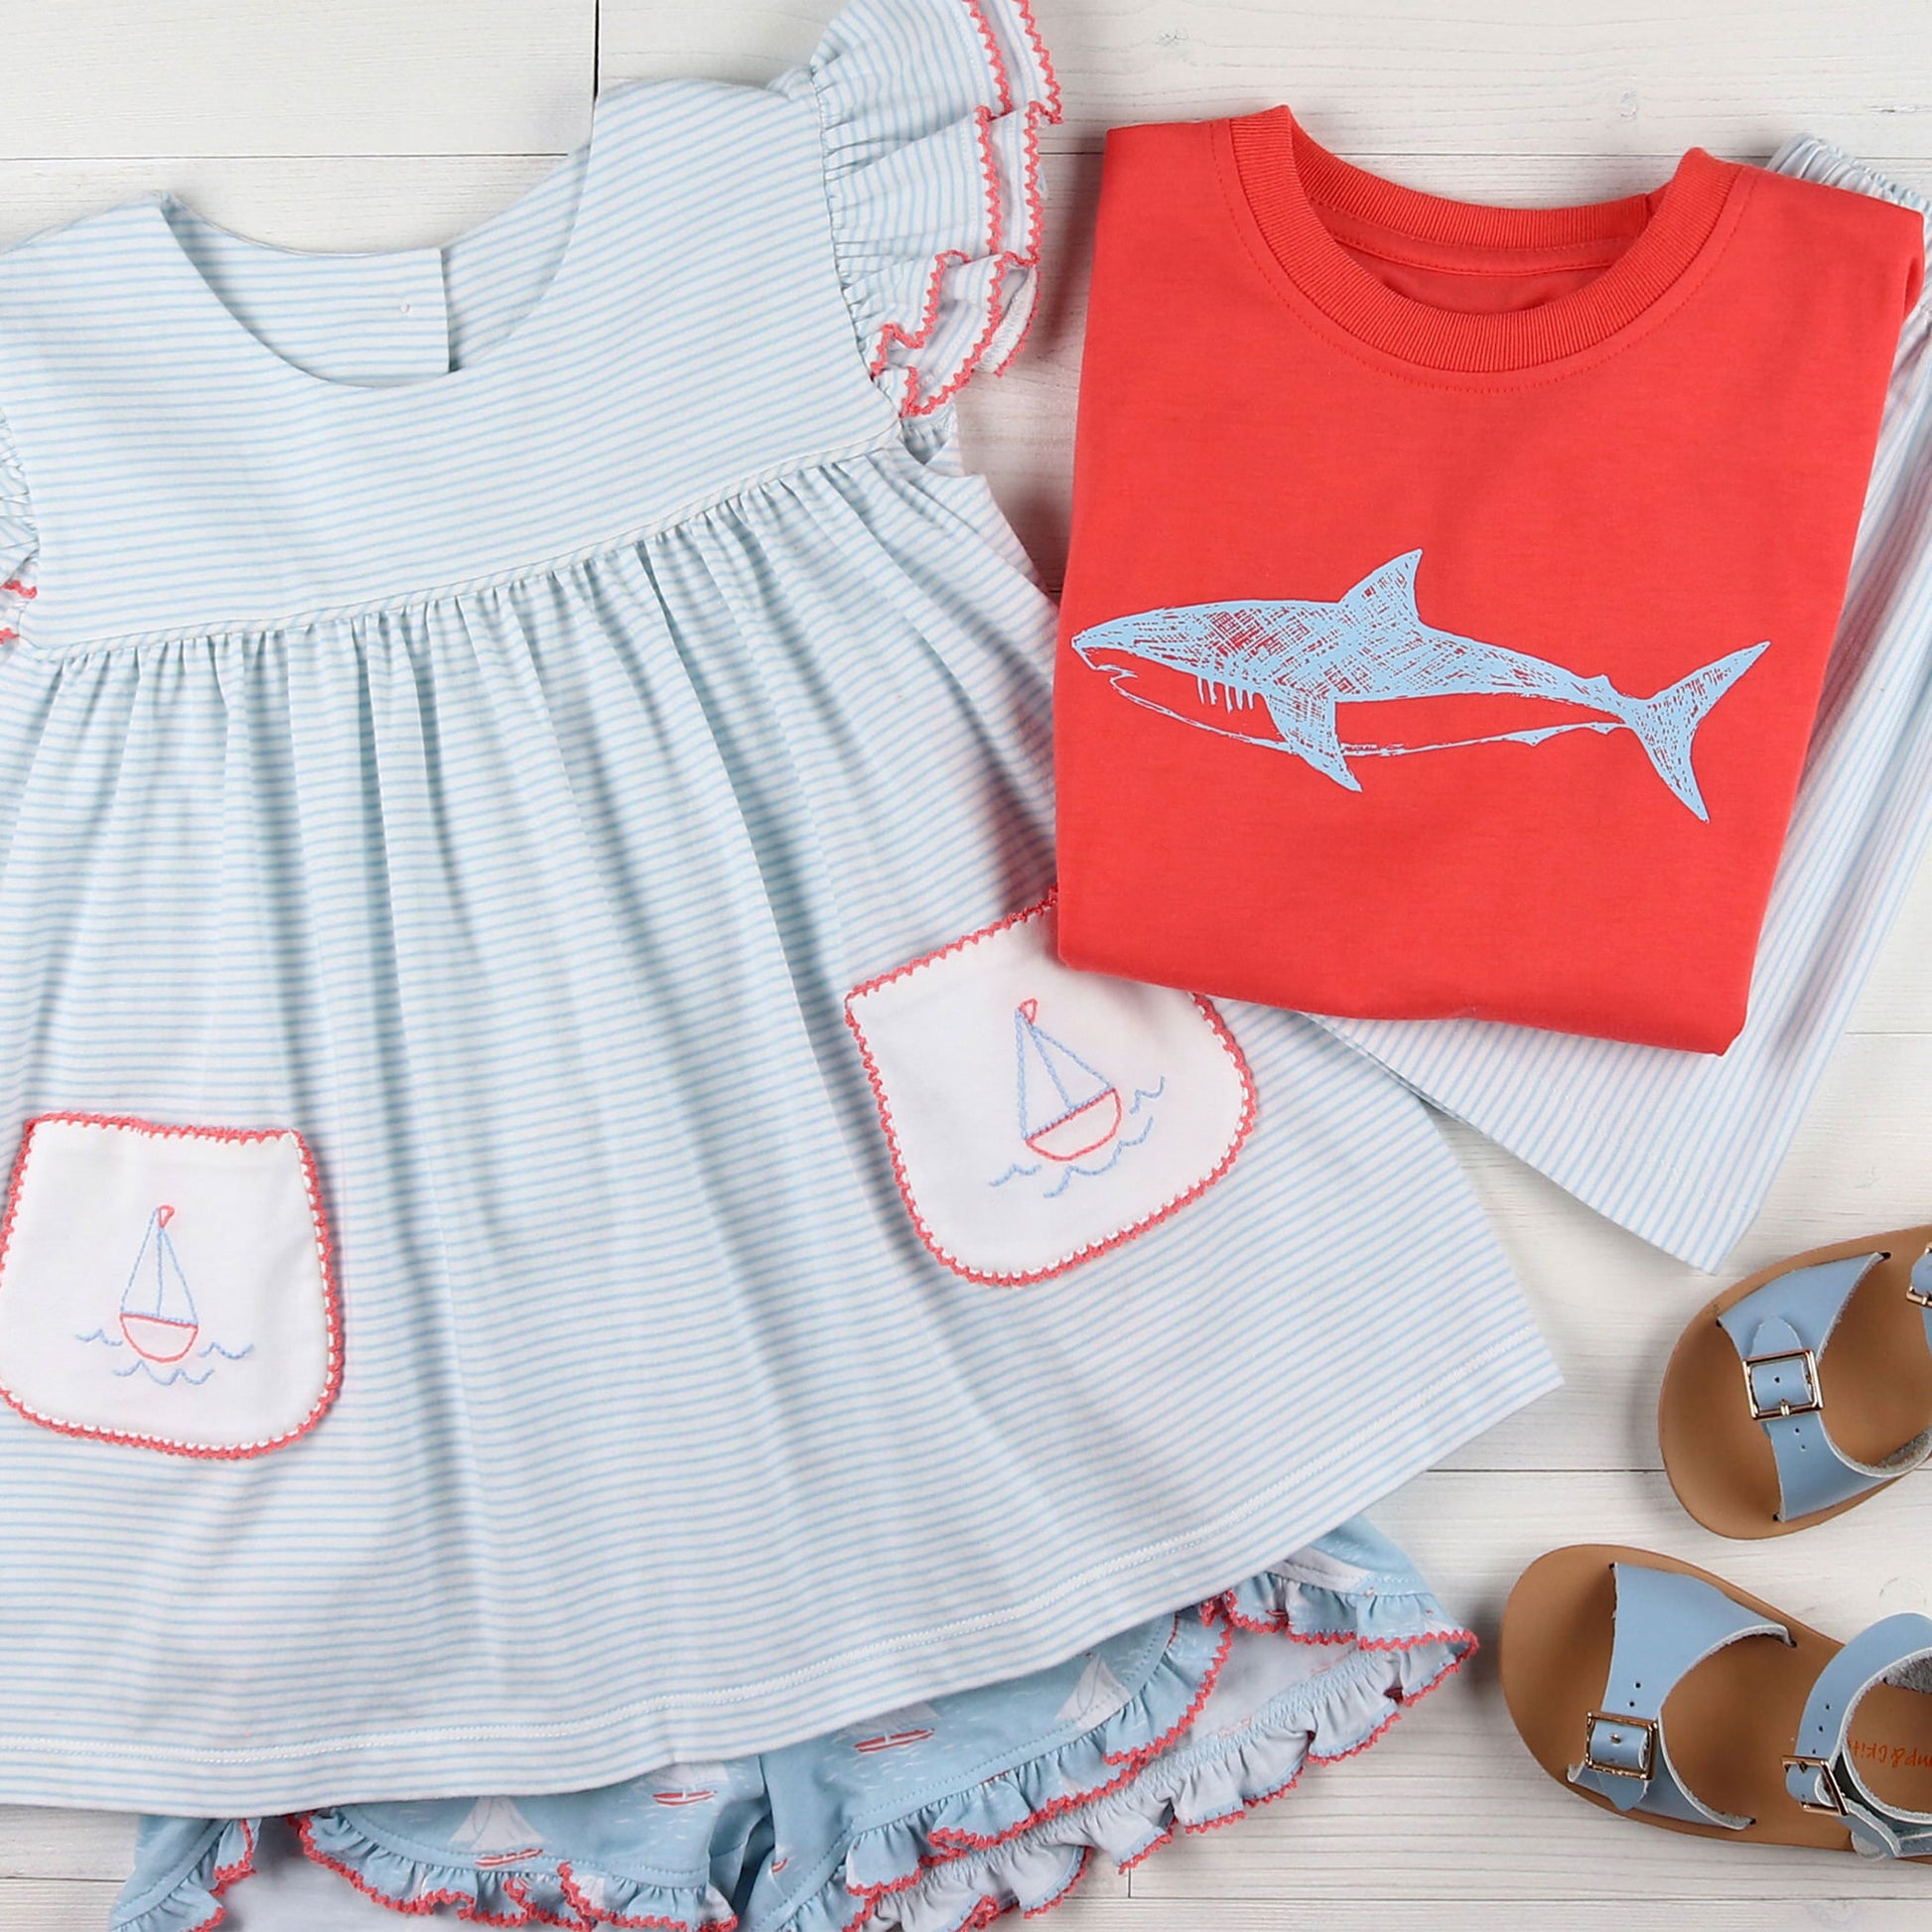 flatlay of striped girls outfit, light blue sandals, red shark graphic tee